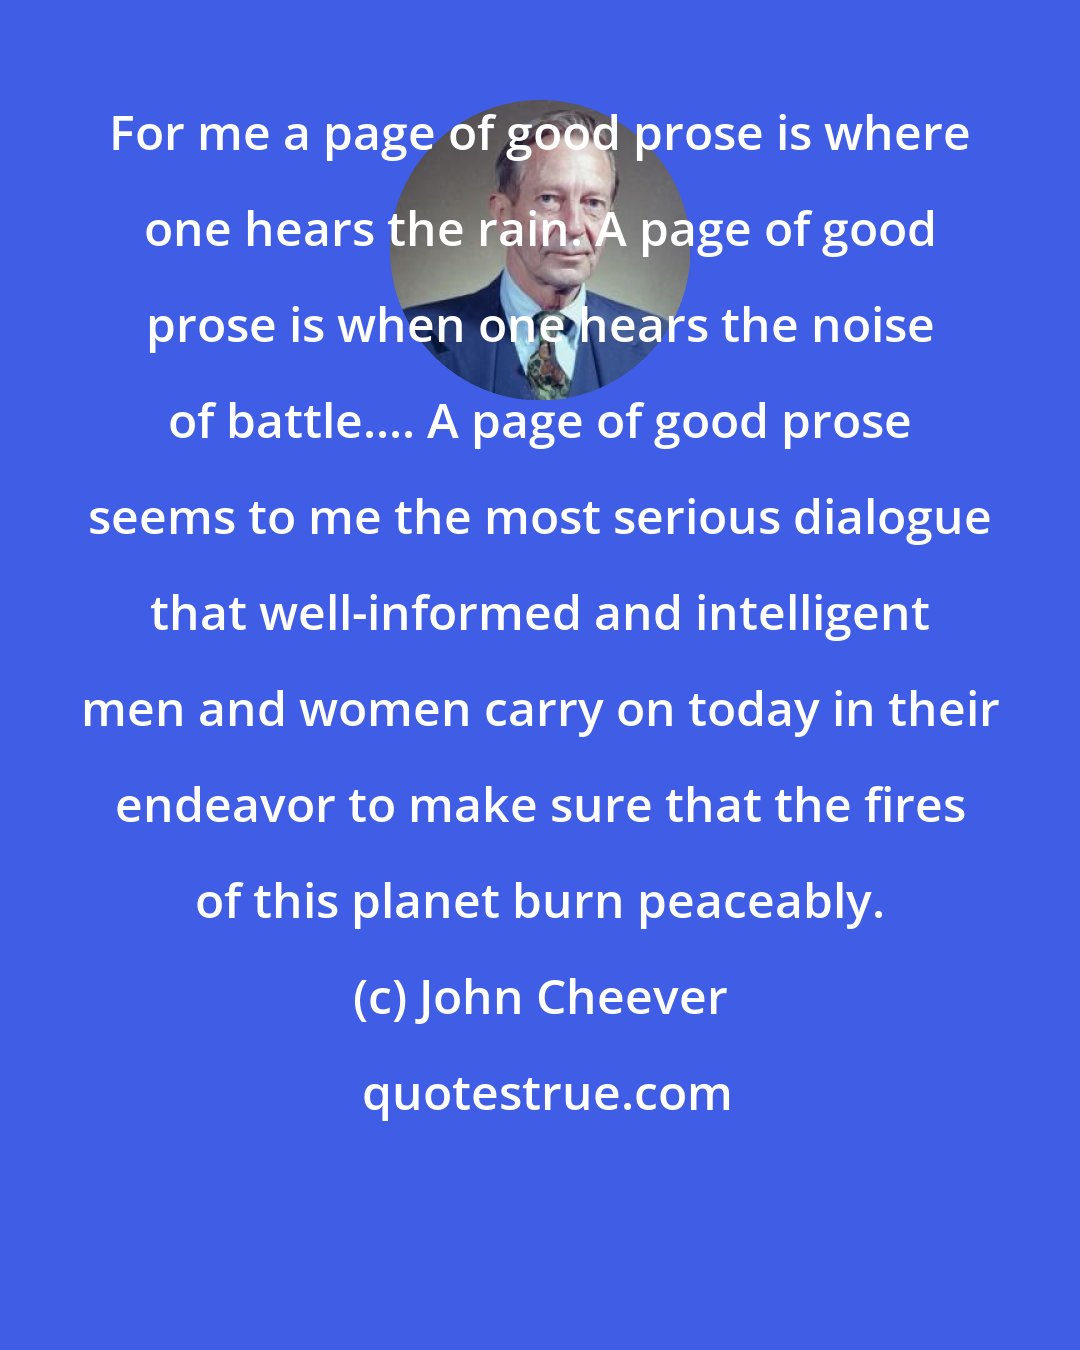 John Cheever: For me a page of good prose is where one hears the rain. A page of good prose is when one hears the noise of battle.... A page of good prose seems to me the most serious dialogue that well-informed and intelligent men and women carry on today in their endeavor to make sure that the fires of this planet burn peaceably.